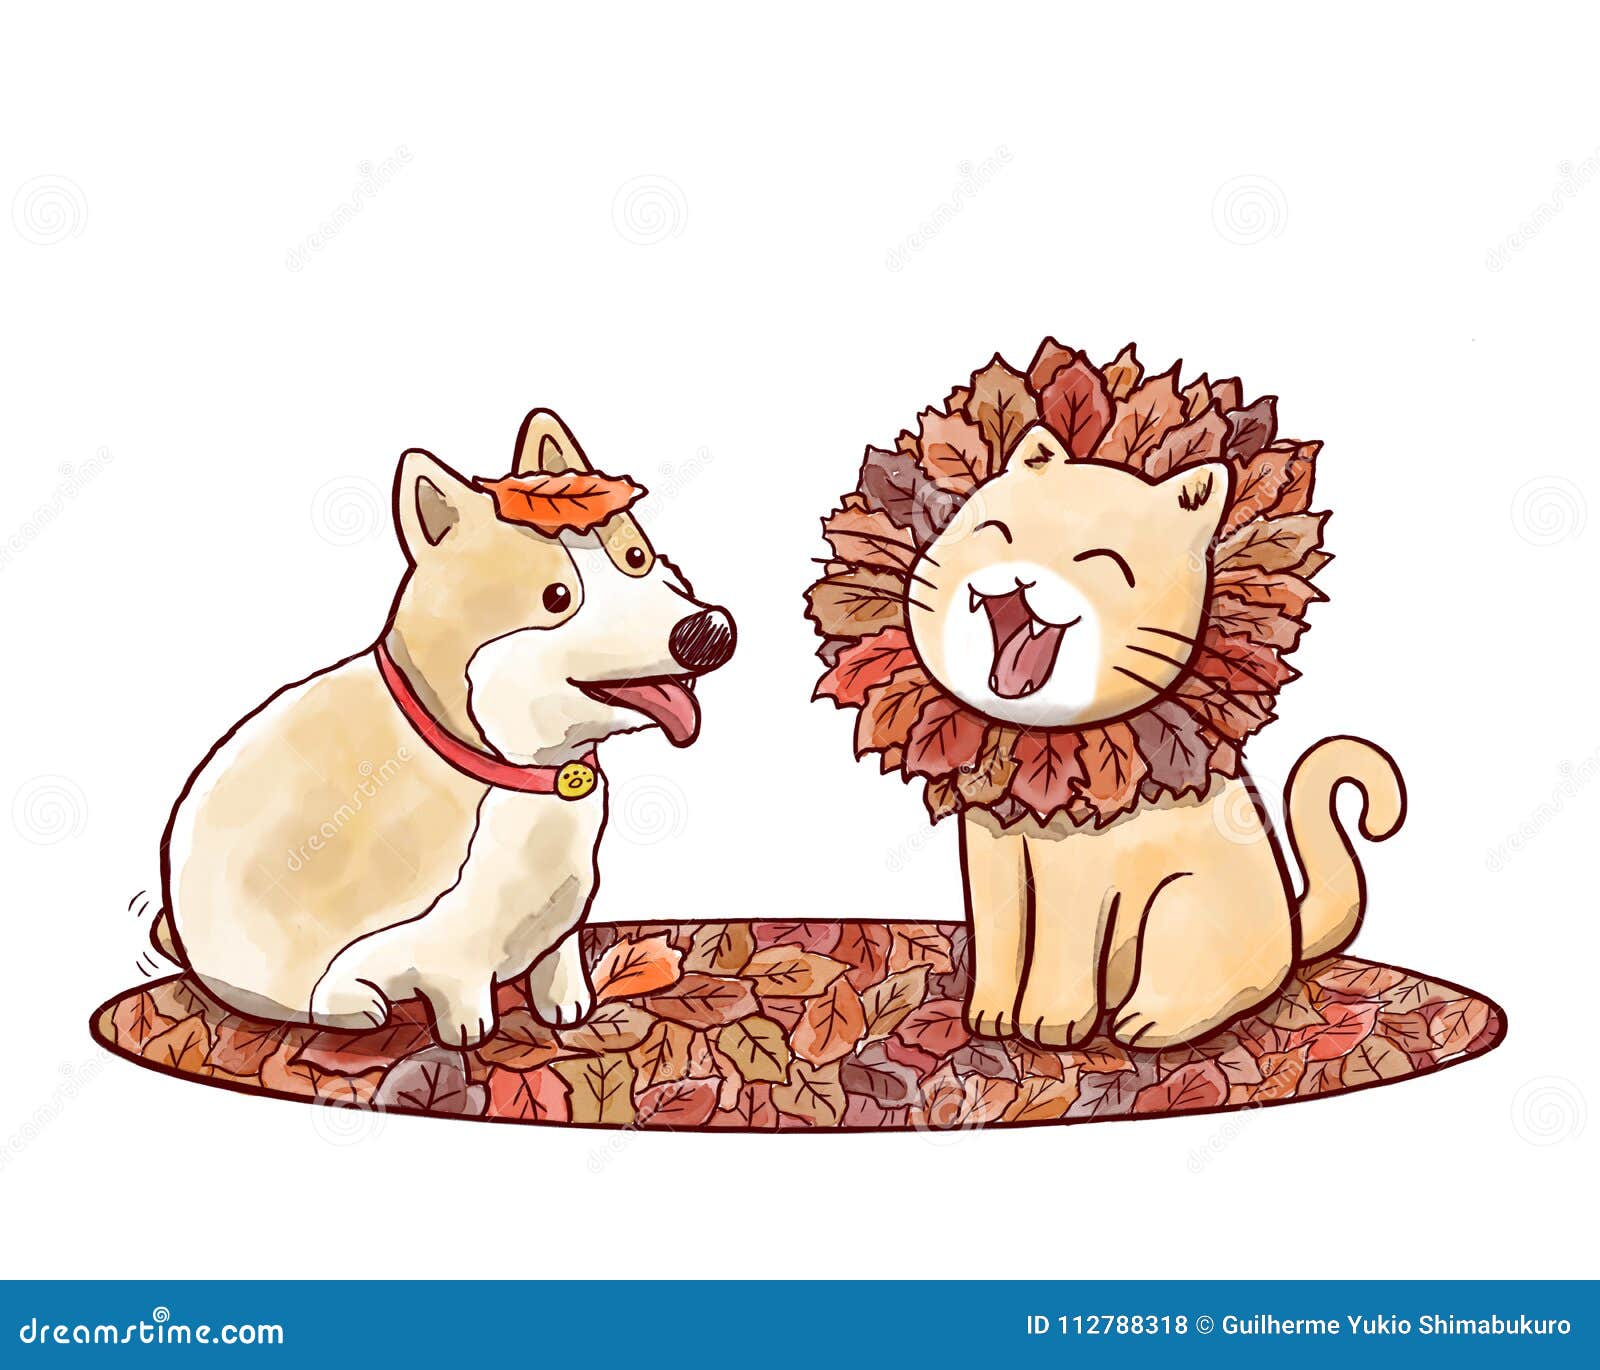 dog and cat imitating lion with mane made of autumn leaves